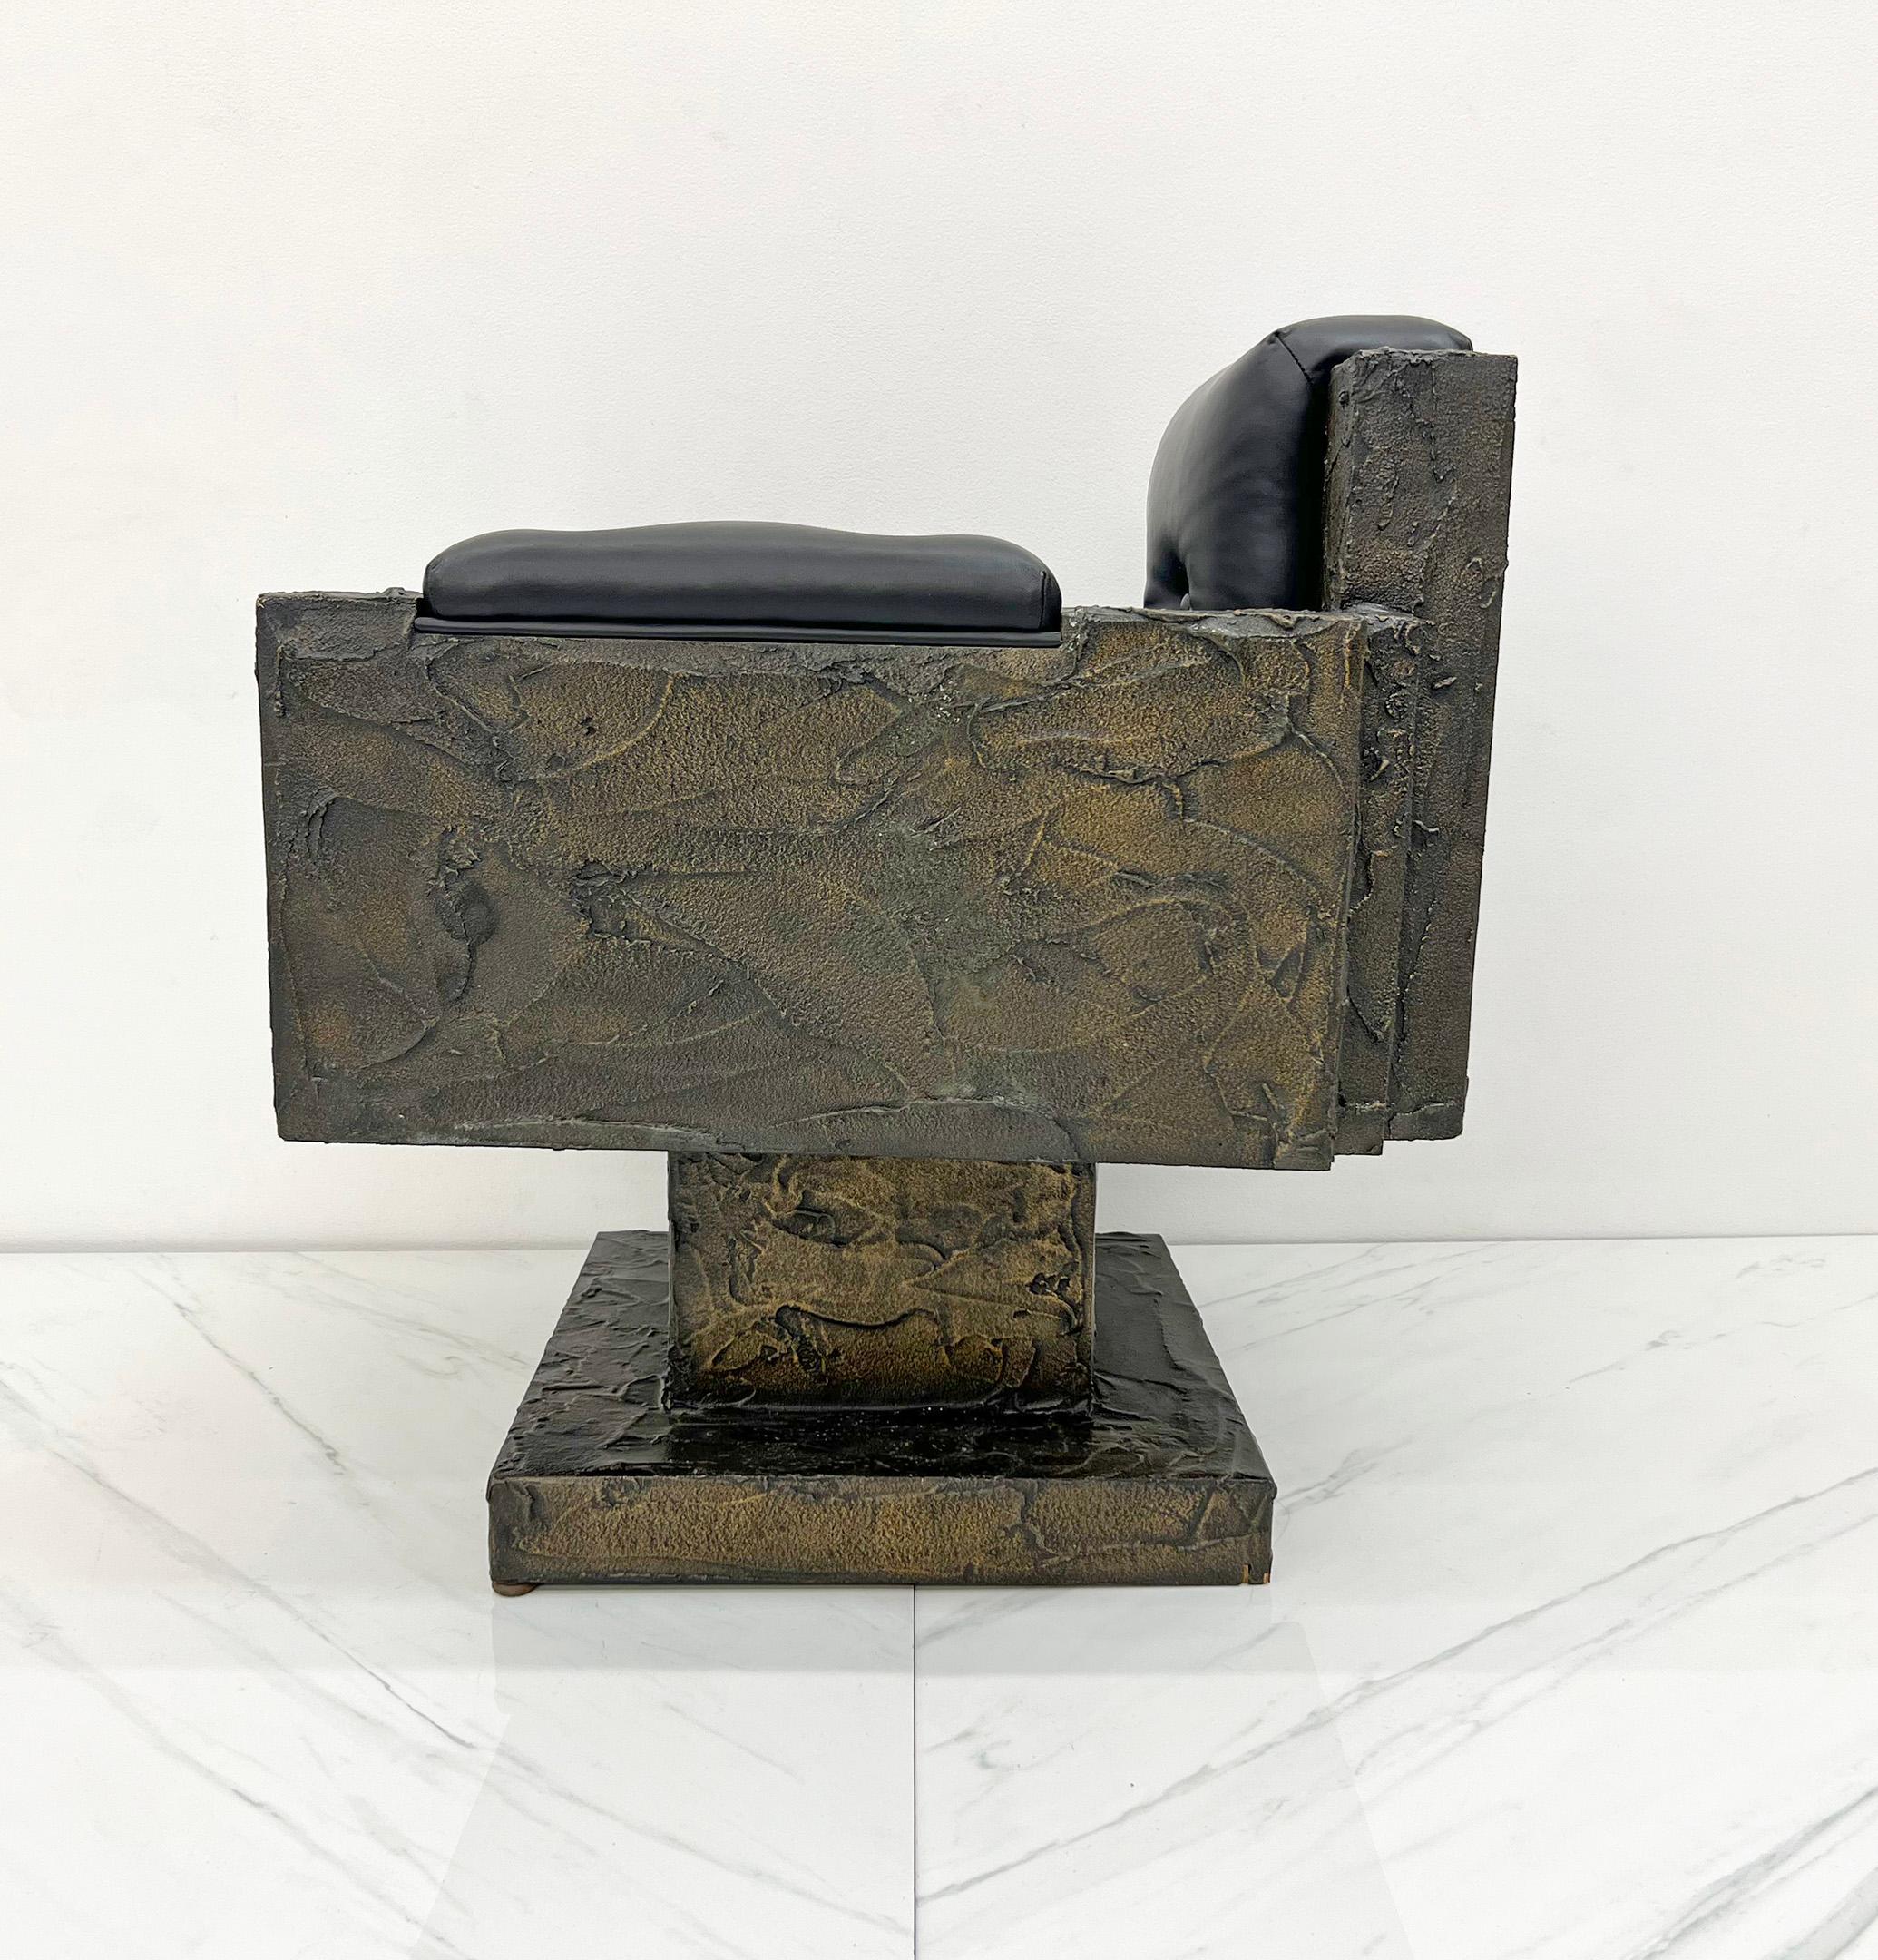 Early Paul Evans Sculpted Bronze Throne Chair, Signed and Dated, 1969 For Sale 3